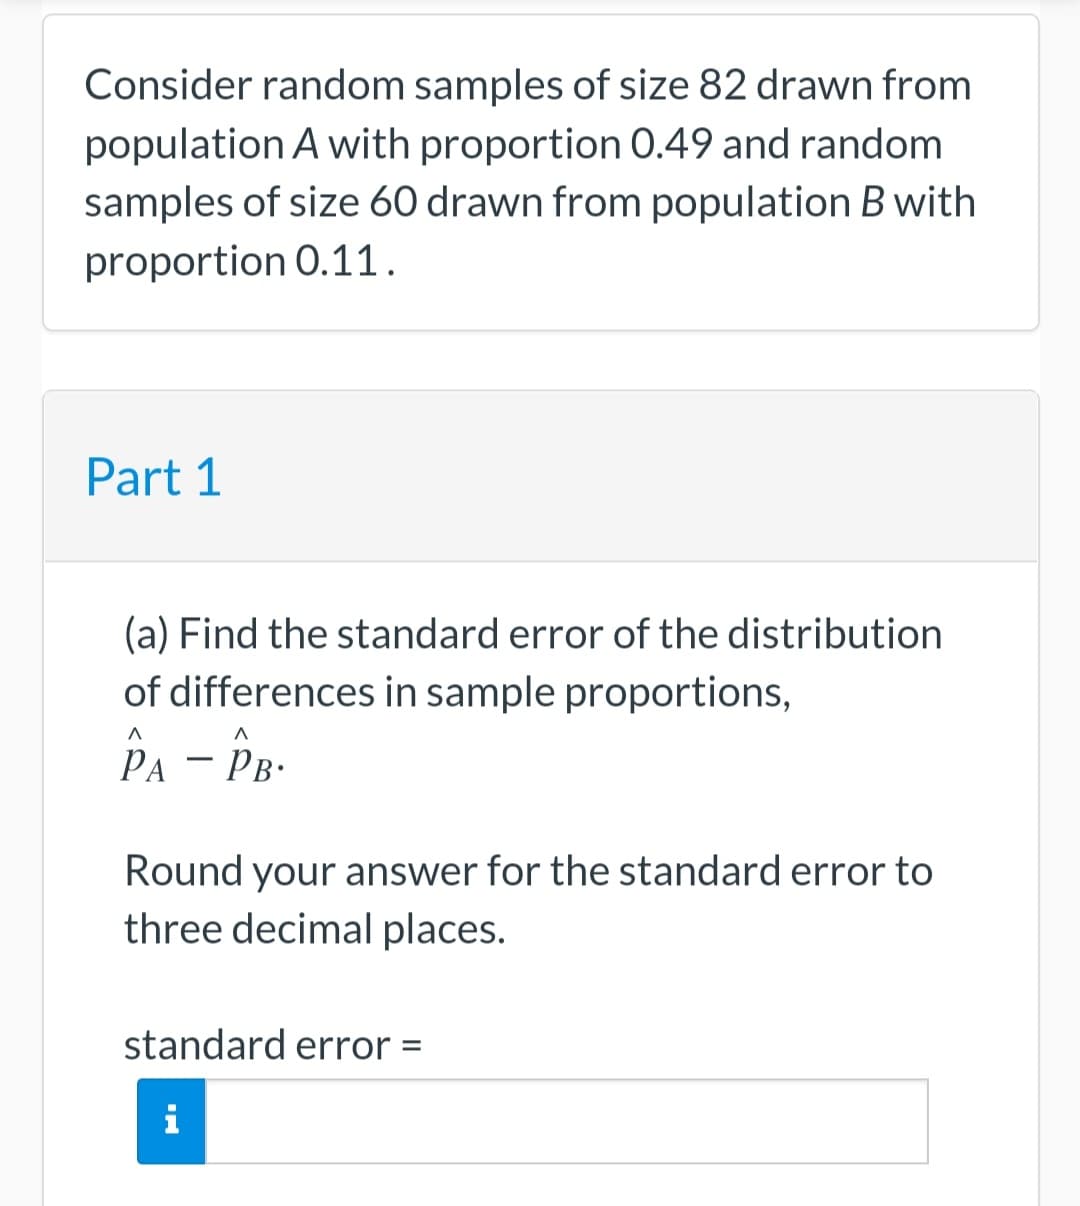 Consider random samples of size 82 drawn from
population A with proportion 0.49 and random
samples of size 60 drawn from population B with
proportion 0.11.
Part 1
(a) Find the standard error of the distribution
of differences in sample proportions,
PA - PB.
Round your answer for the standard error to
three decimal places.
standard error =
CH